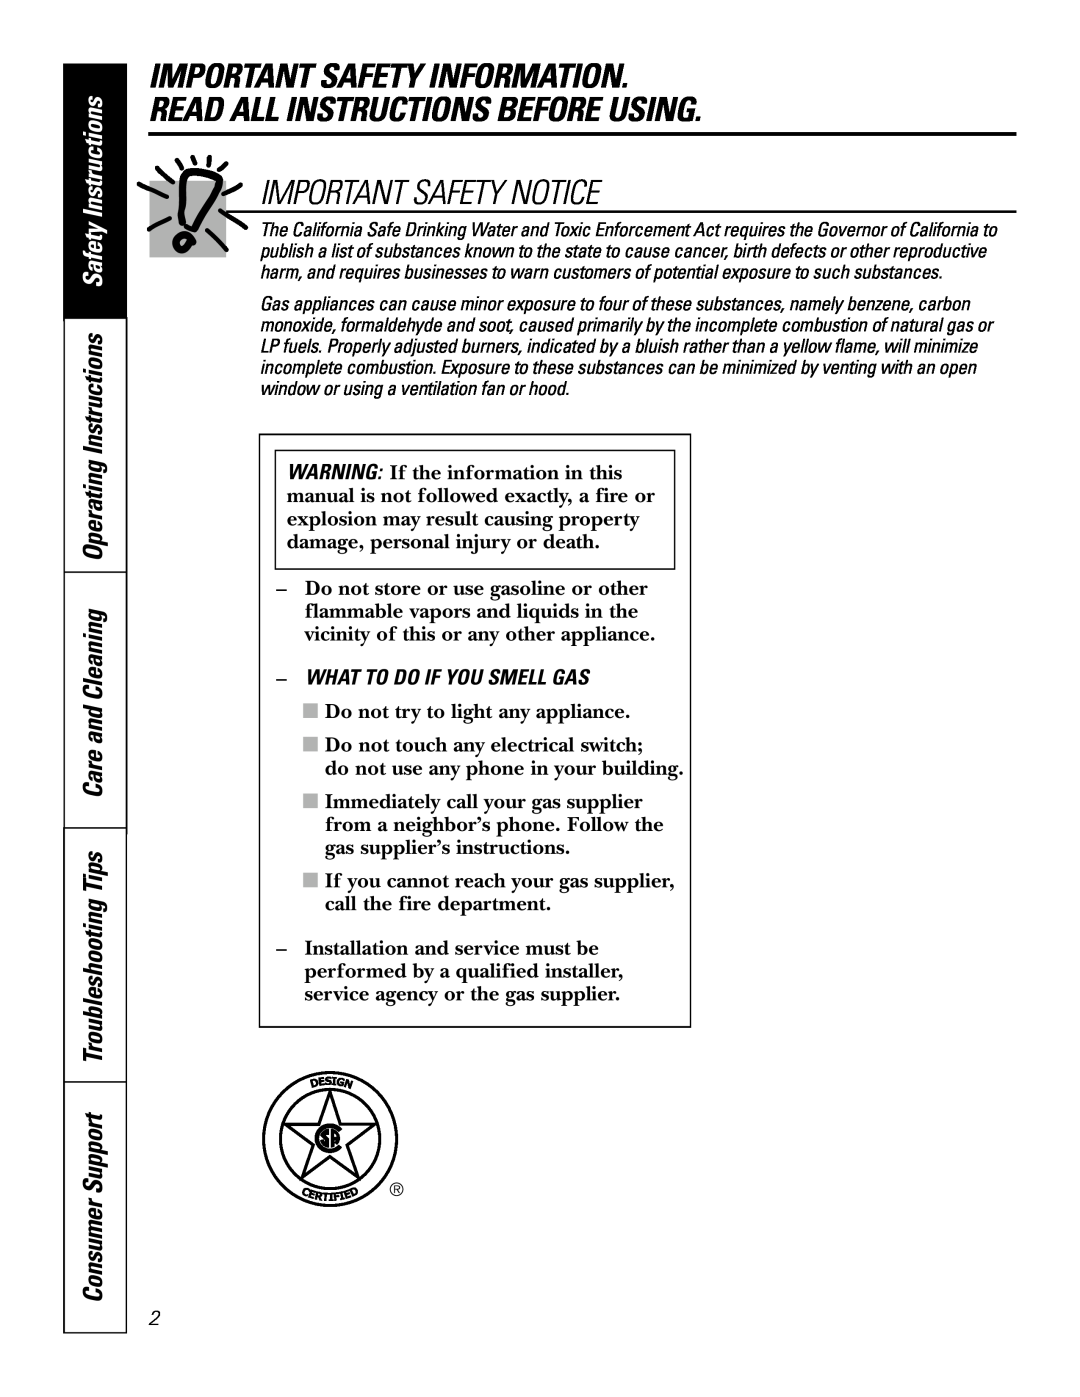 GE JGP337 operating instructions Important Safety Information Read All Instructions Before Using, Important Safety Notice 